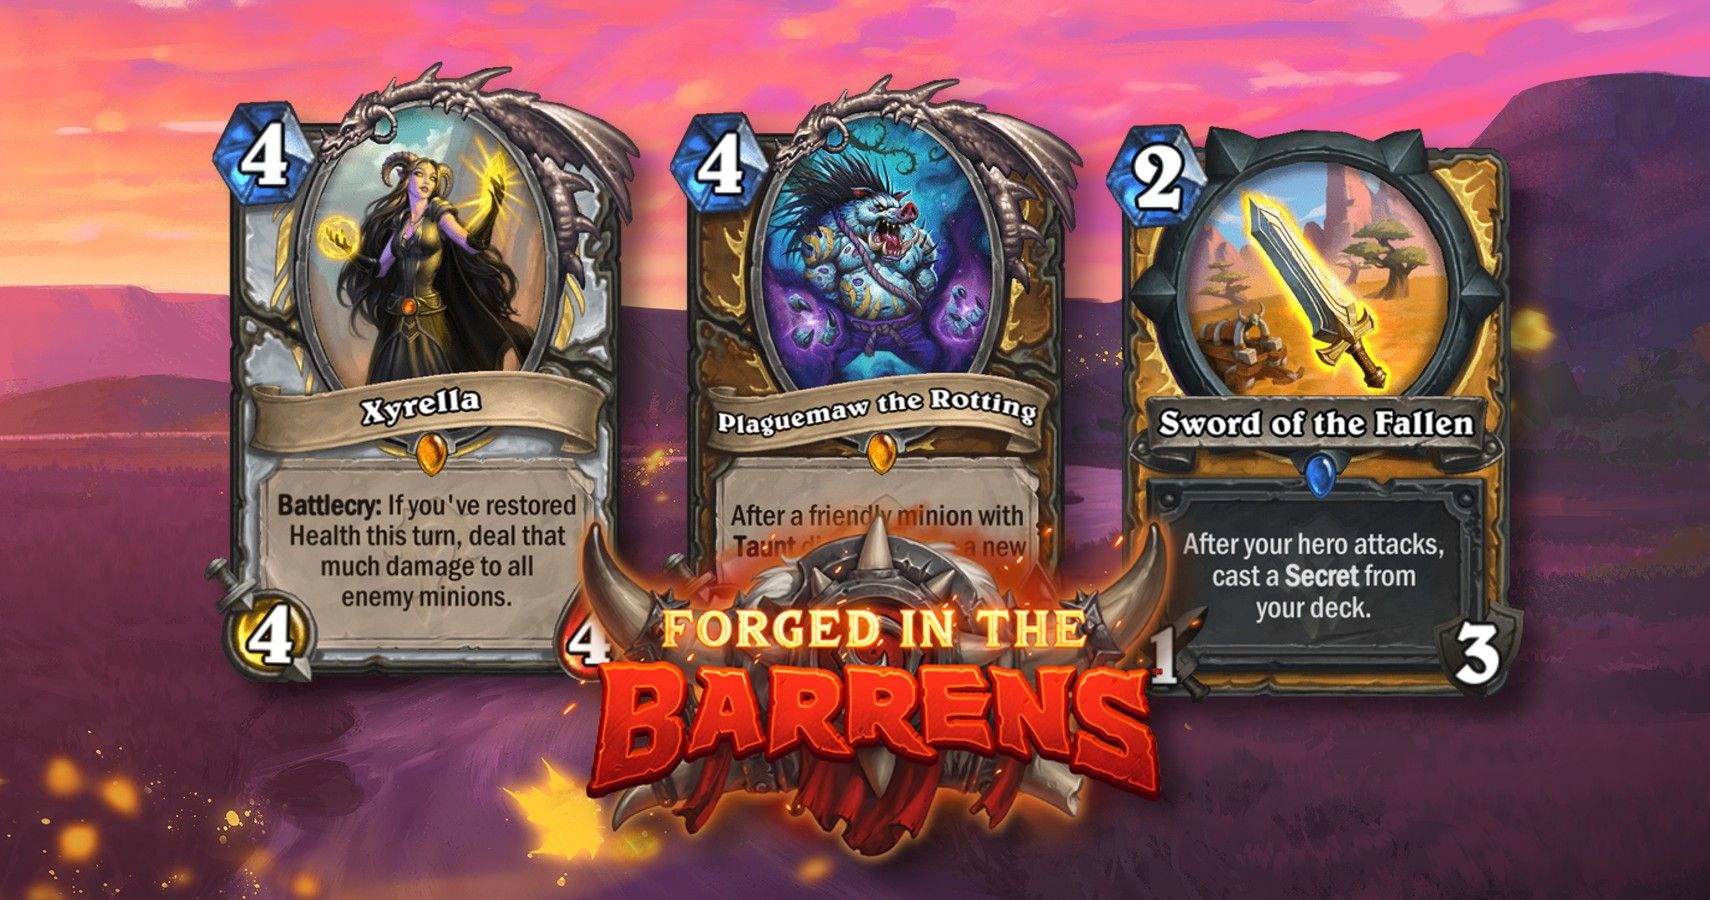 Hearthstone 10 Best Cards From New Expansion In The Barrens